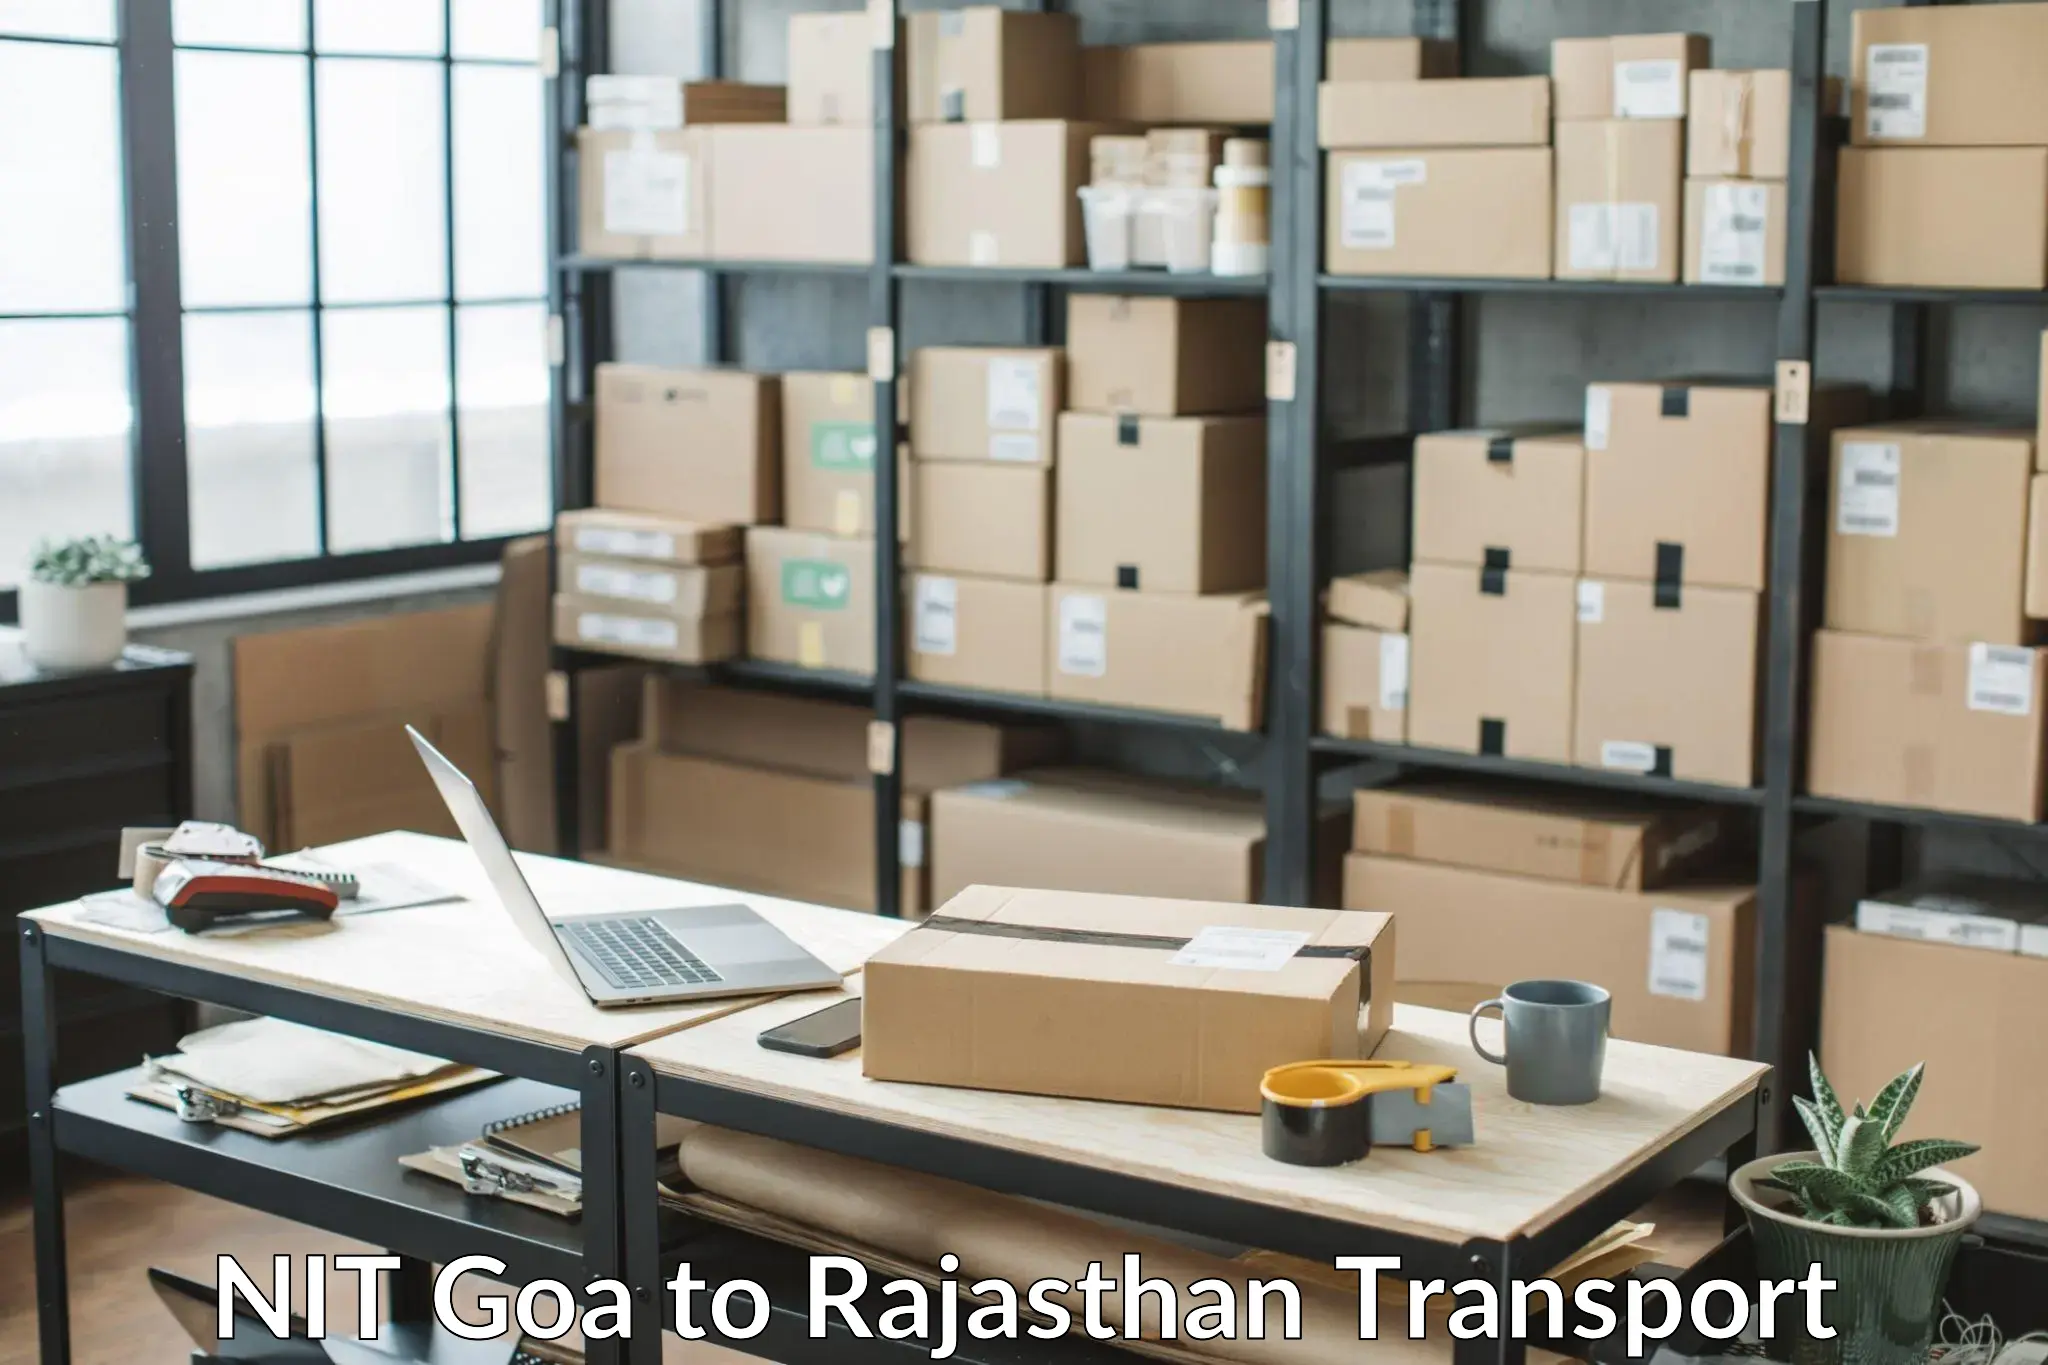 Road transport online services in NIT Goa to Didwana